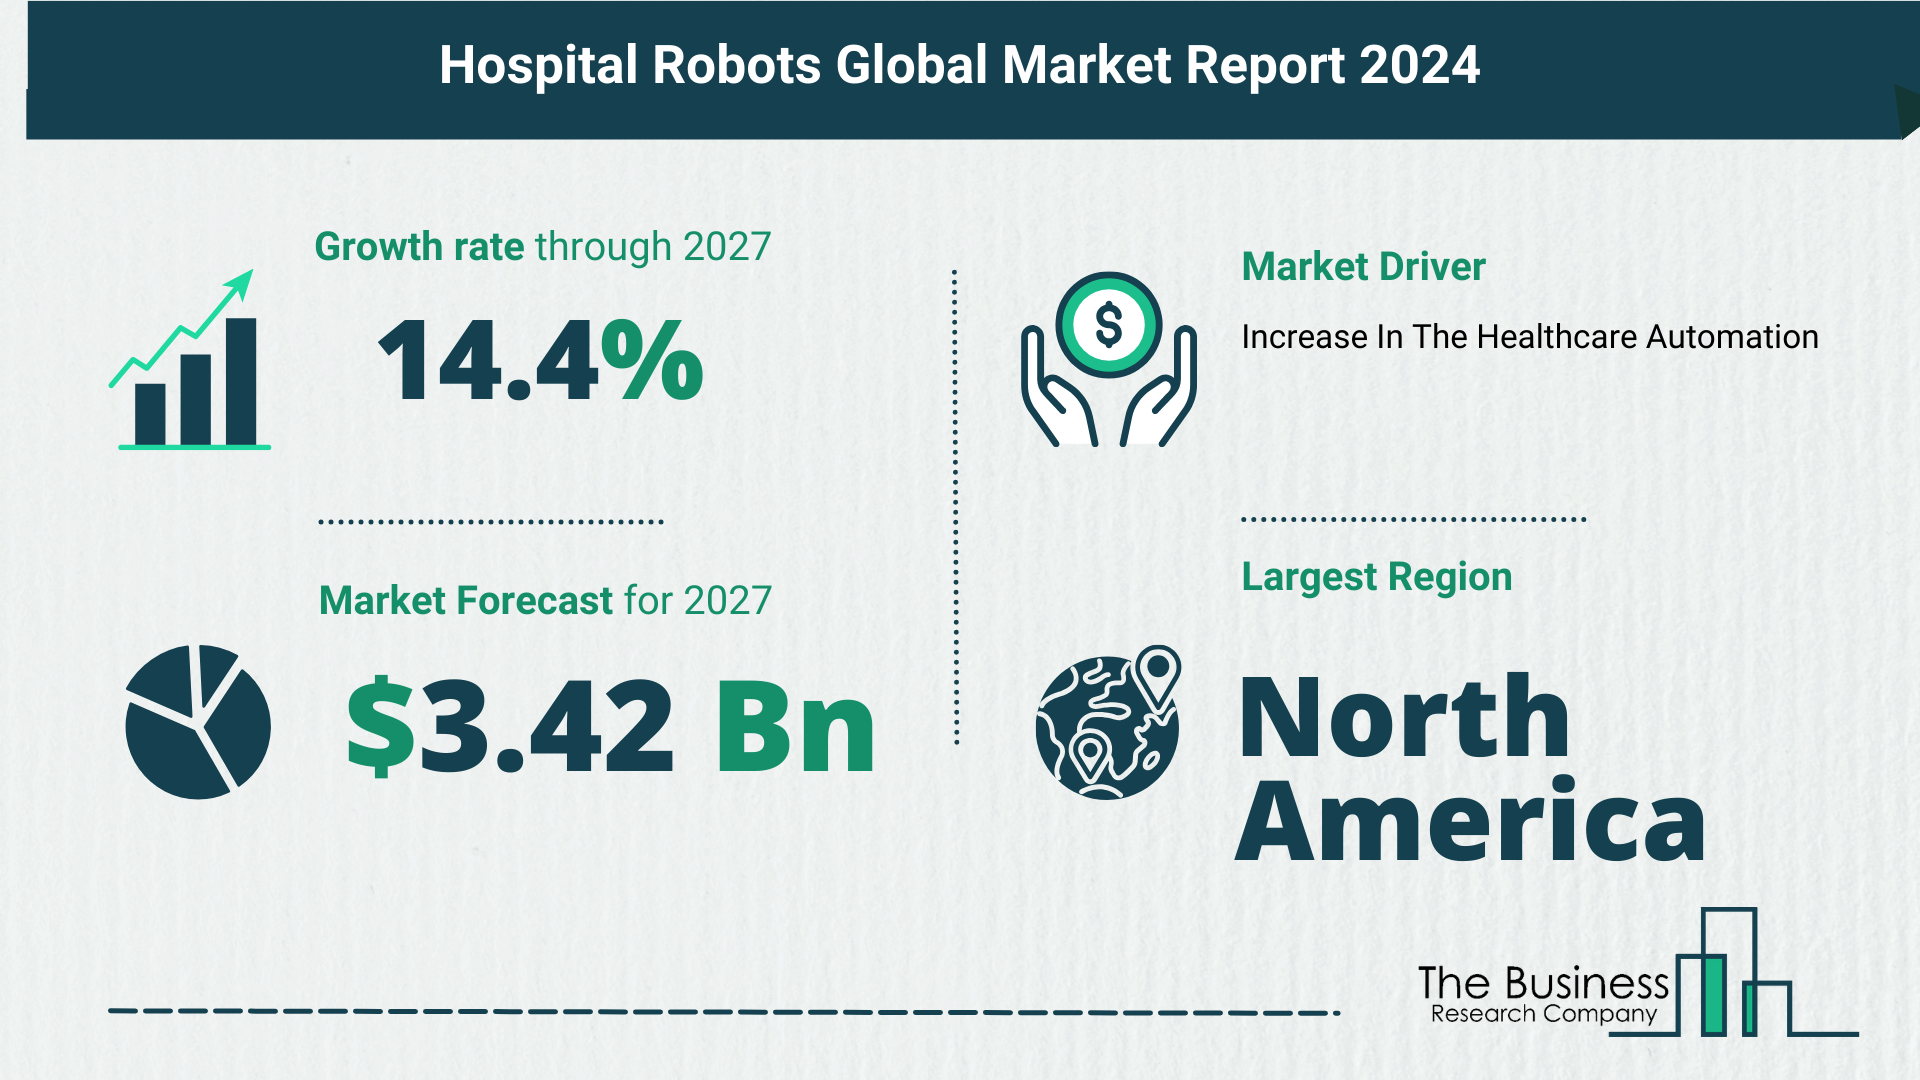 Global Hospital Robots Market Analysis: Estimated Market Size And Growth Rate